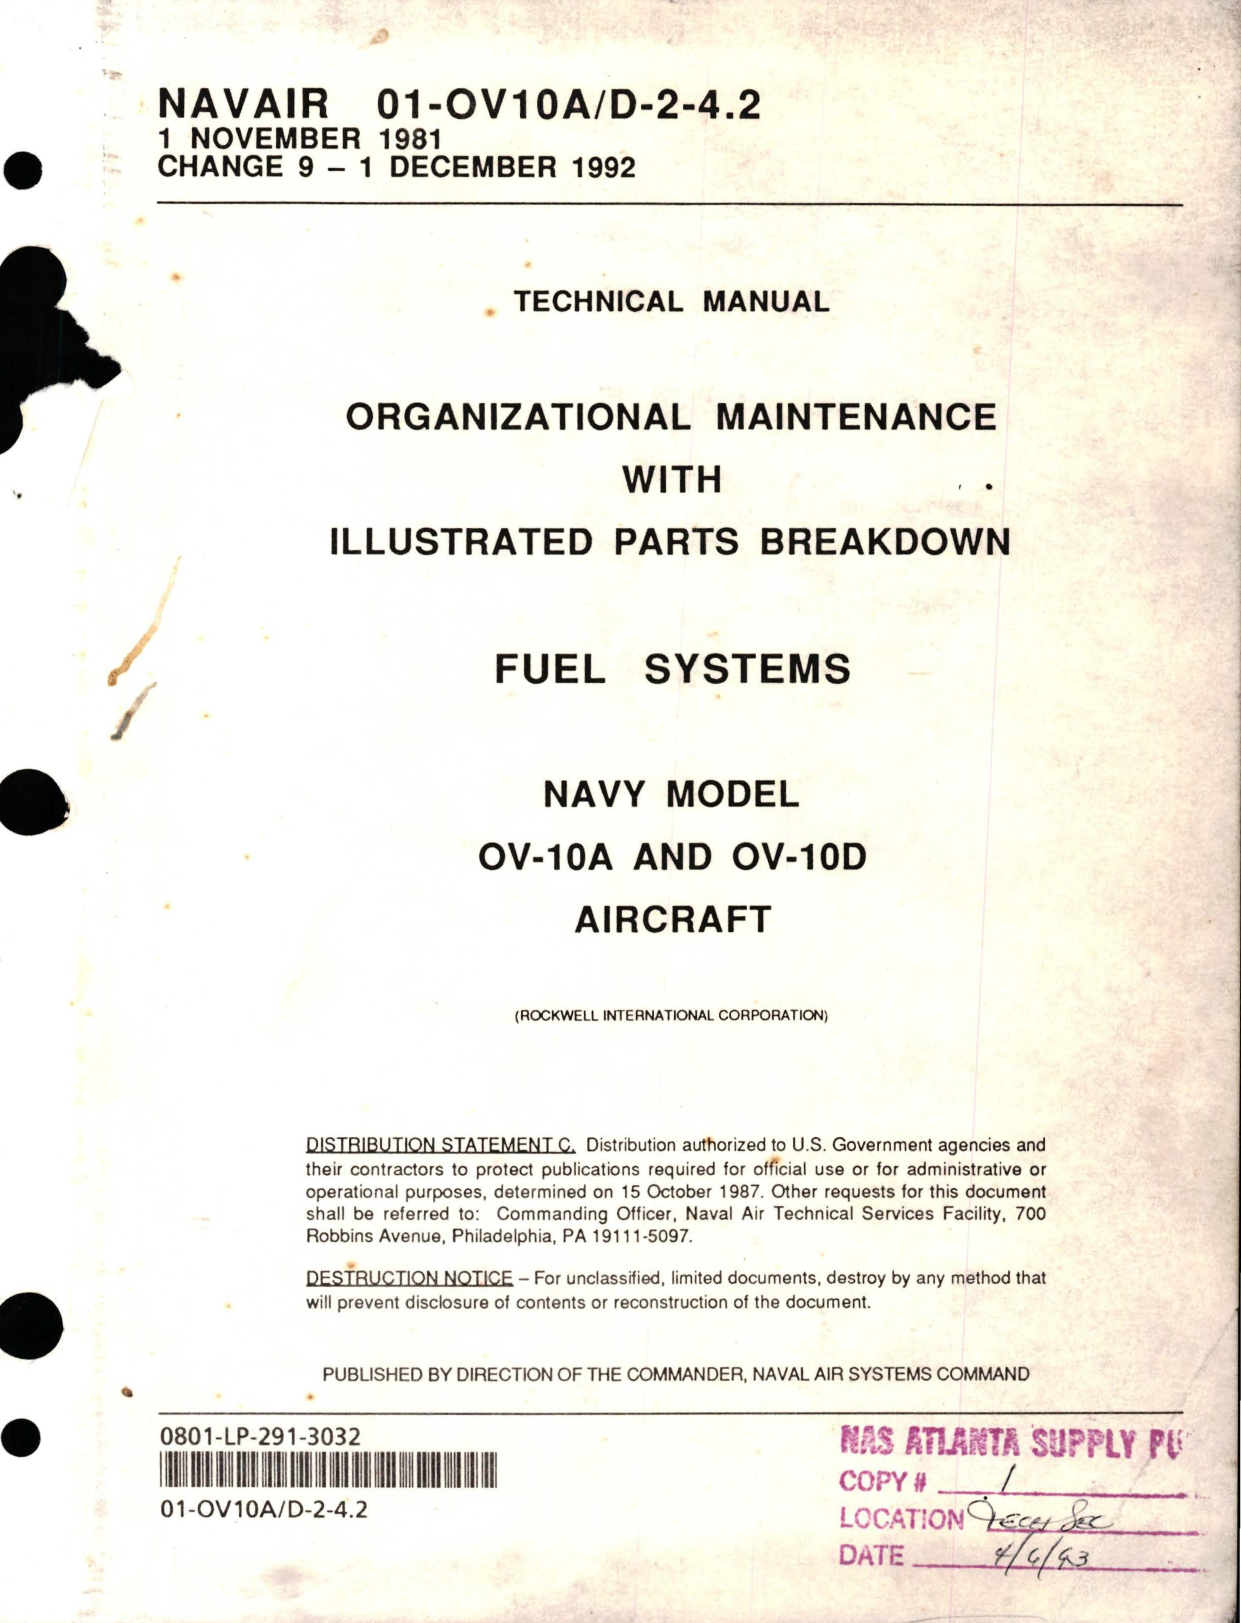 Sample page 1 from AirCorps Library document: Organizational Maintenance with Illustrated Parts Breakdown for Fuel Systems on OV-10A and OV-10D 